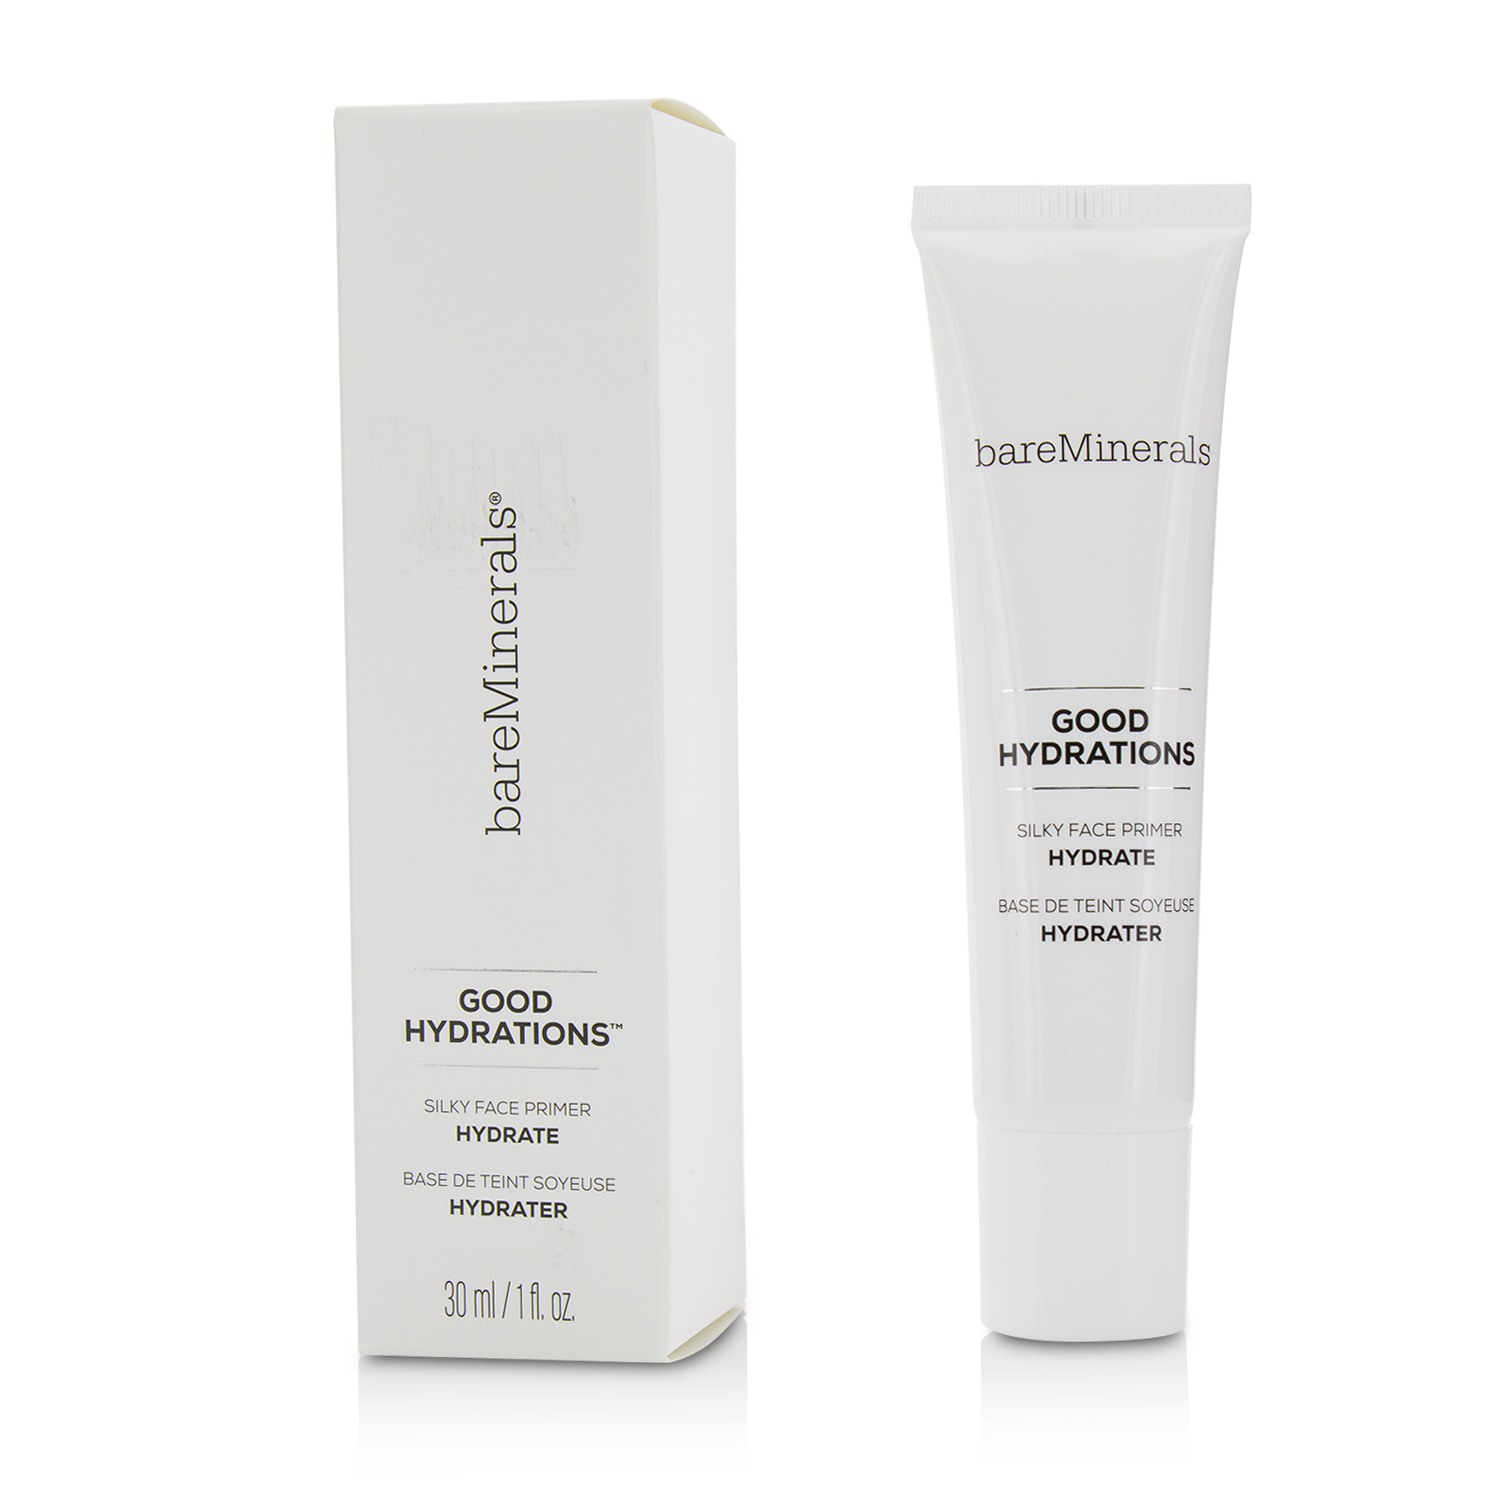 Good Hydrations Silky Face Primer BareMinerals Image